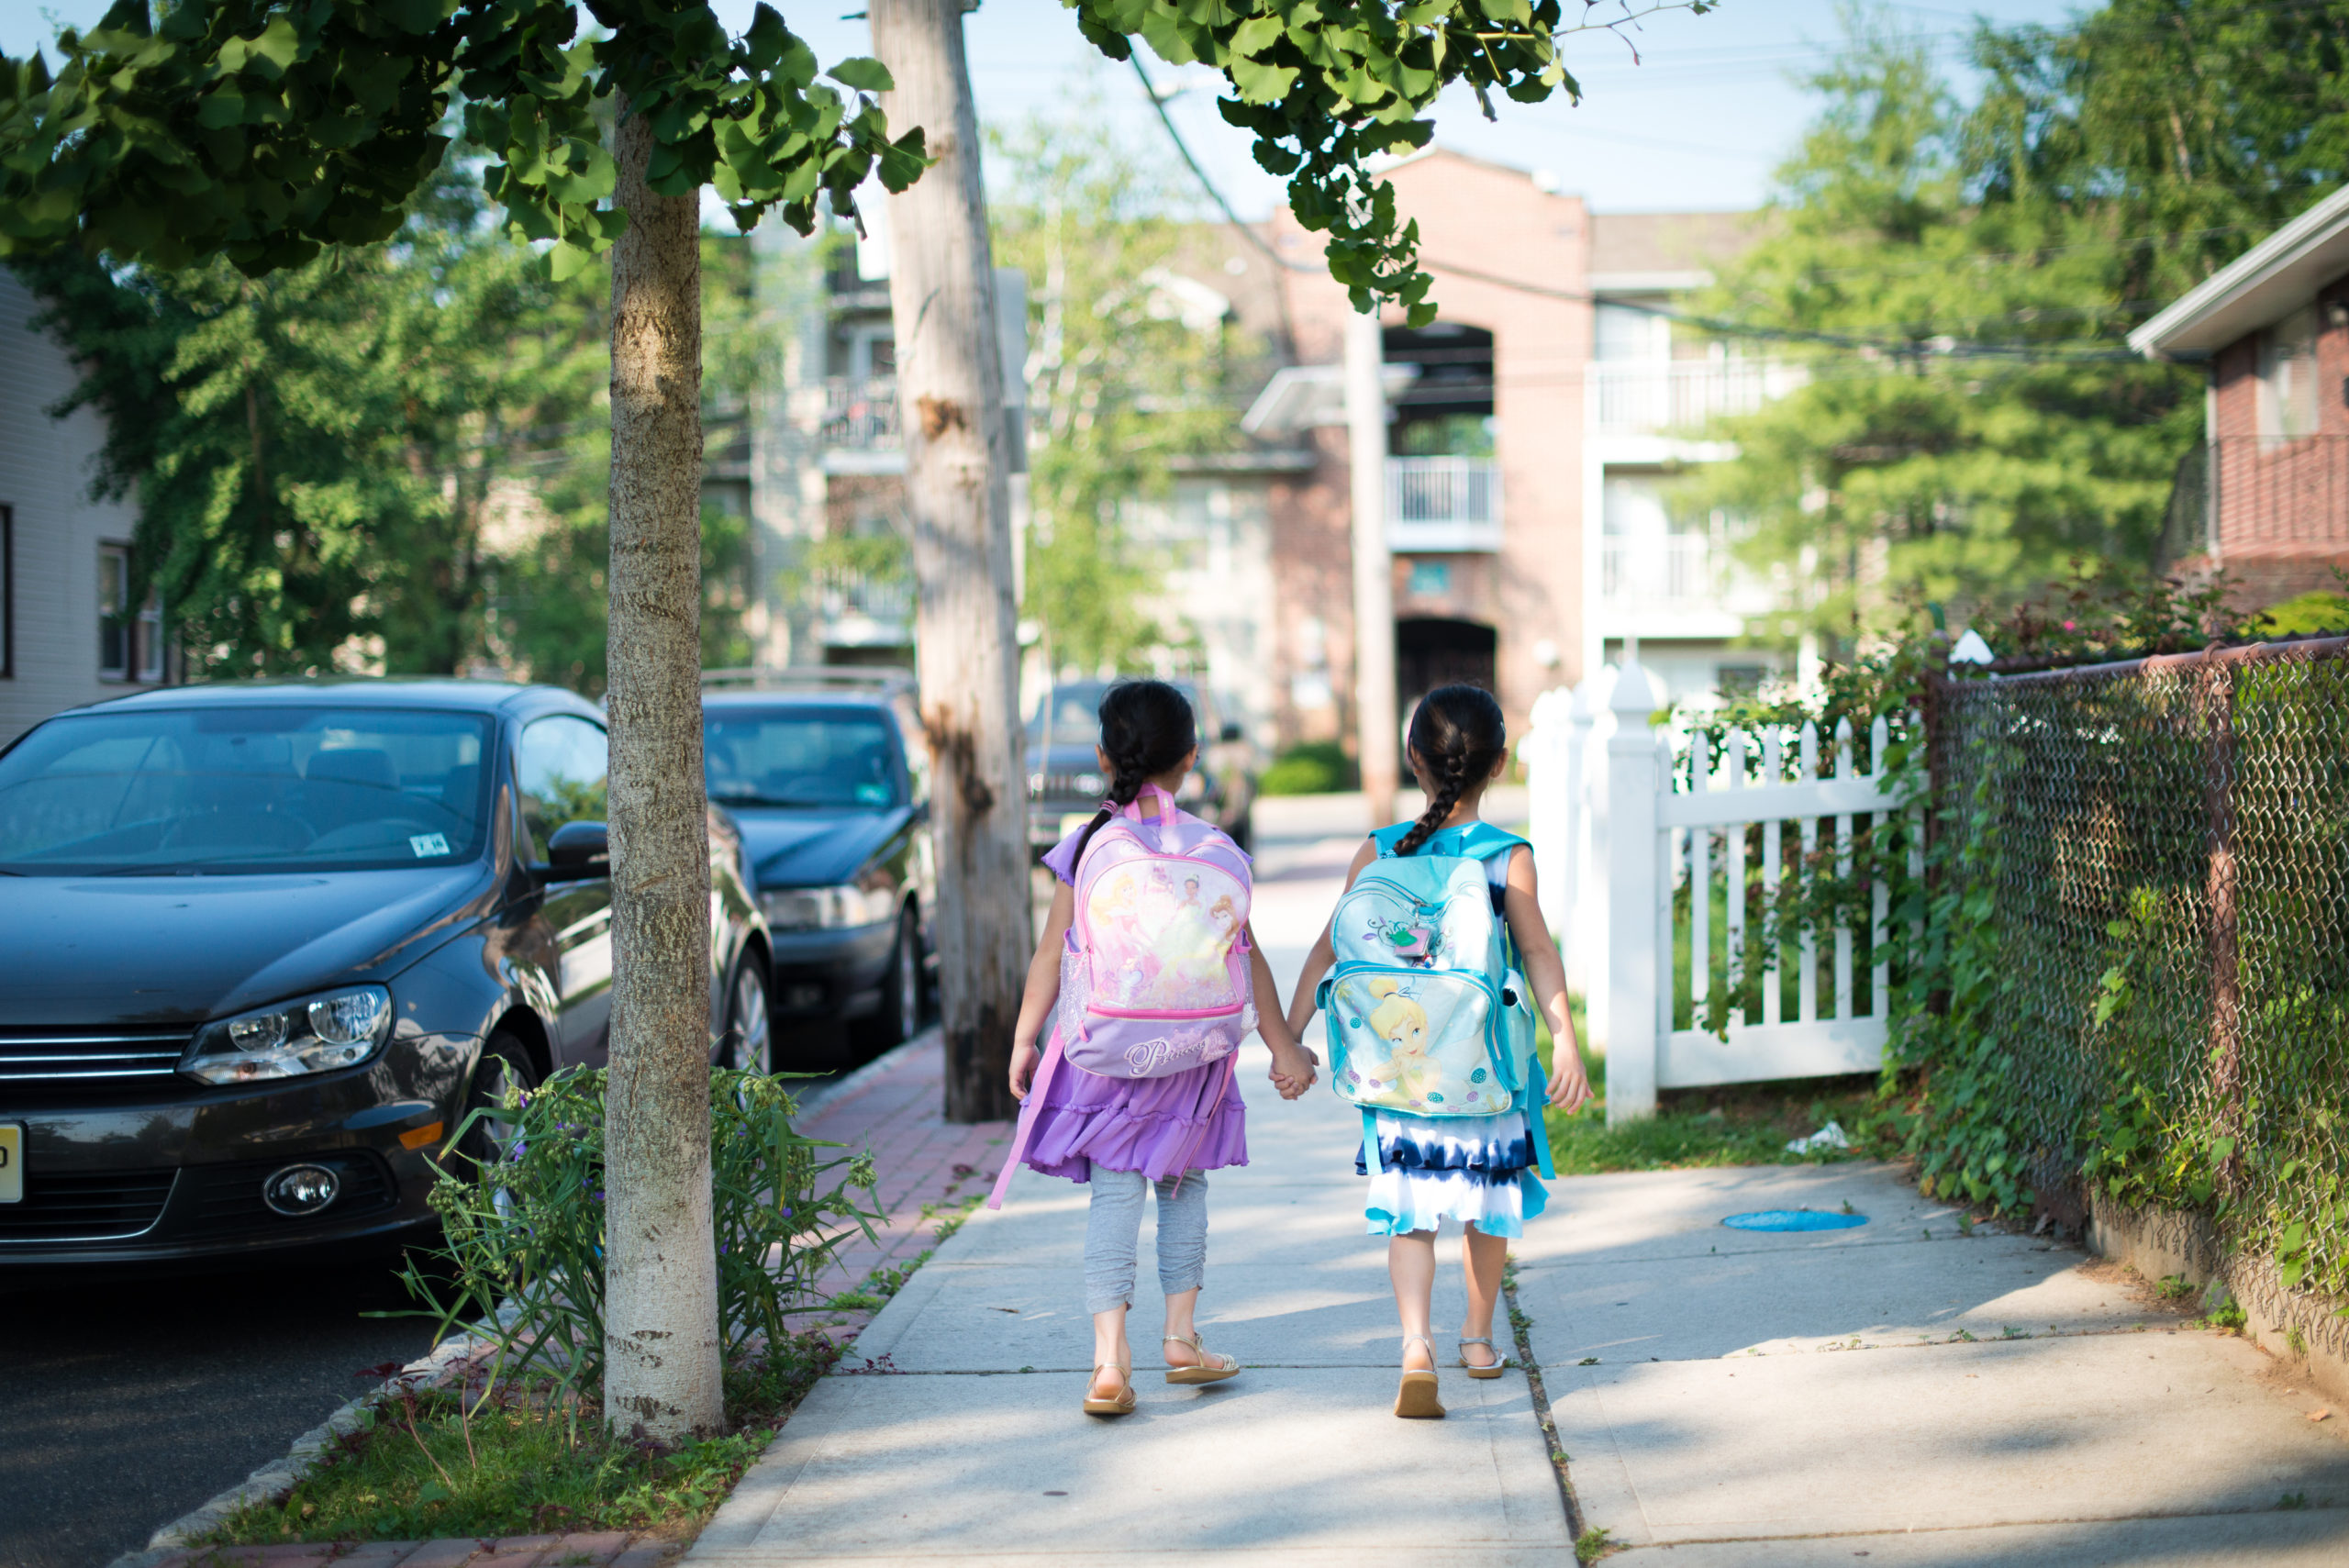 Two young children walk on a sidewalk in a city neighborhood, wearing school backpacks and holsing hands. There are trees and lush greenery along the road and sidewalk. An apartment building is directly ahead of them. There are cars parked on the street to their left. It's a sunny day.